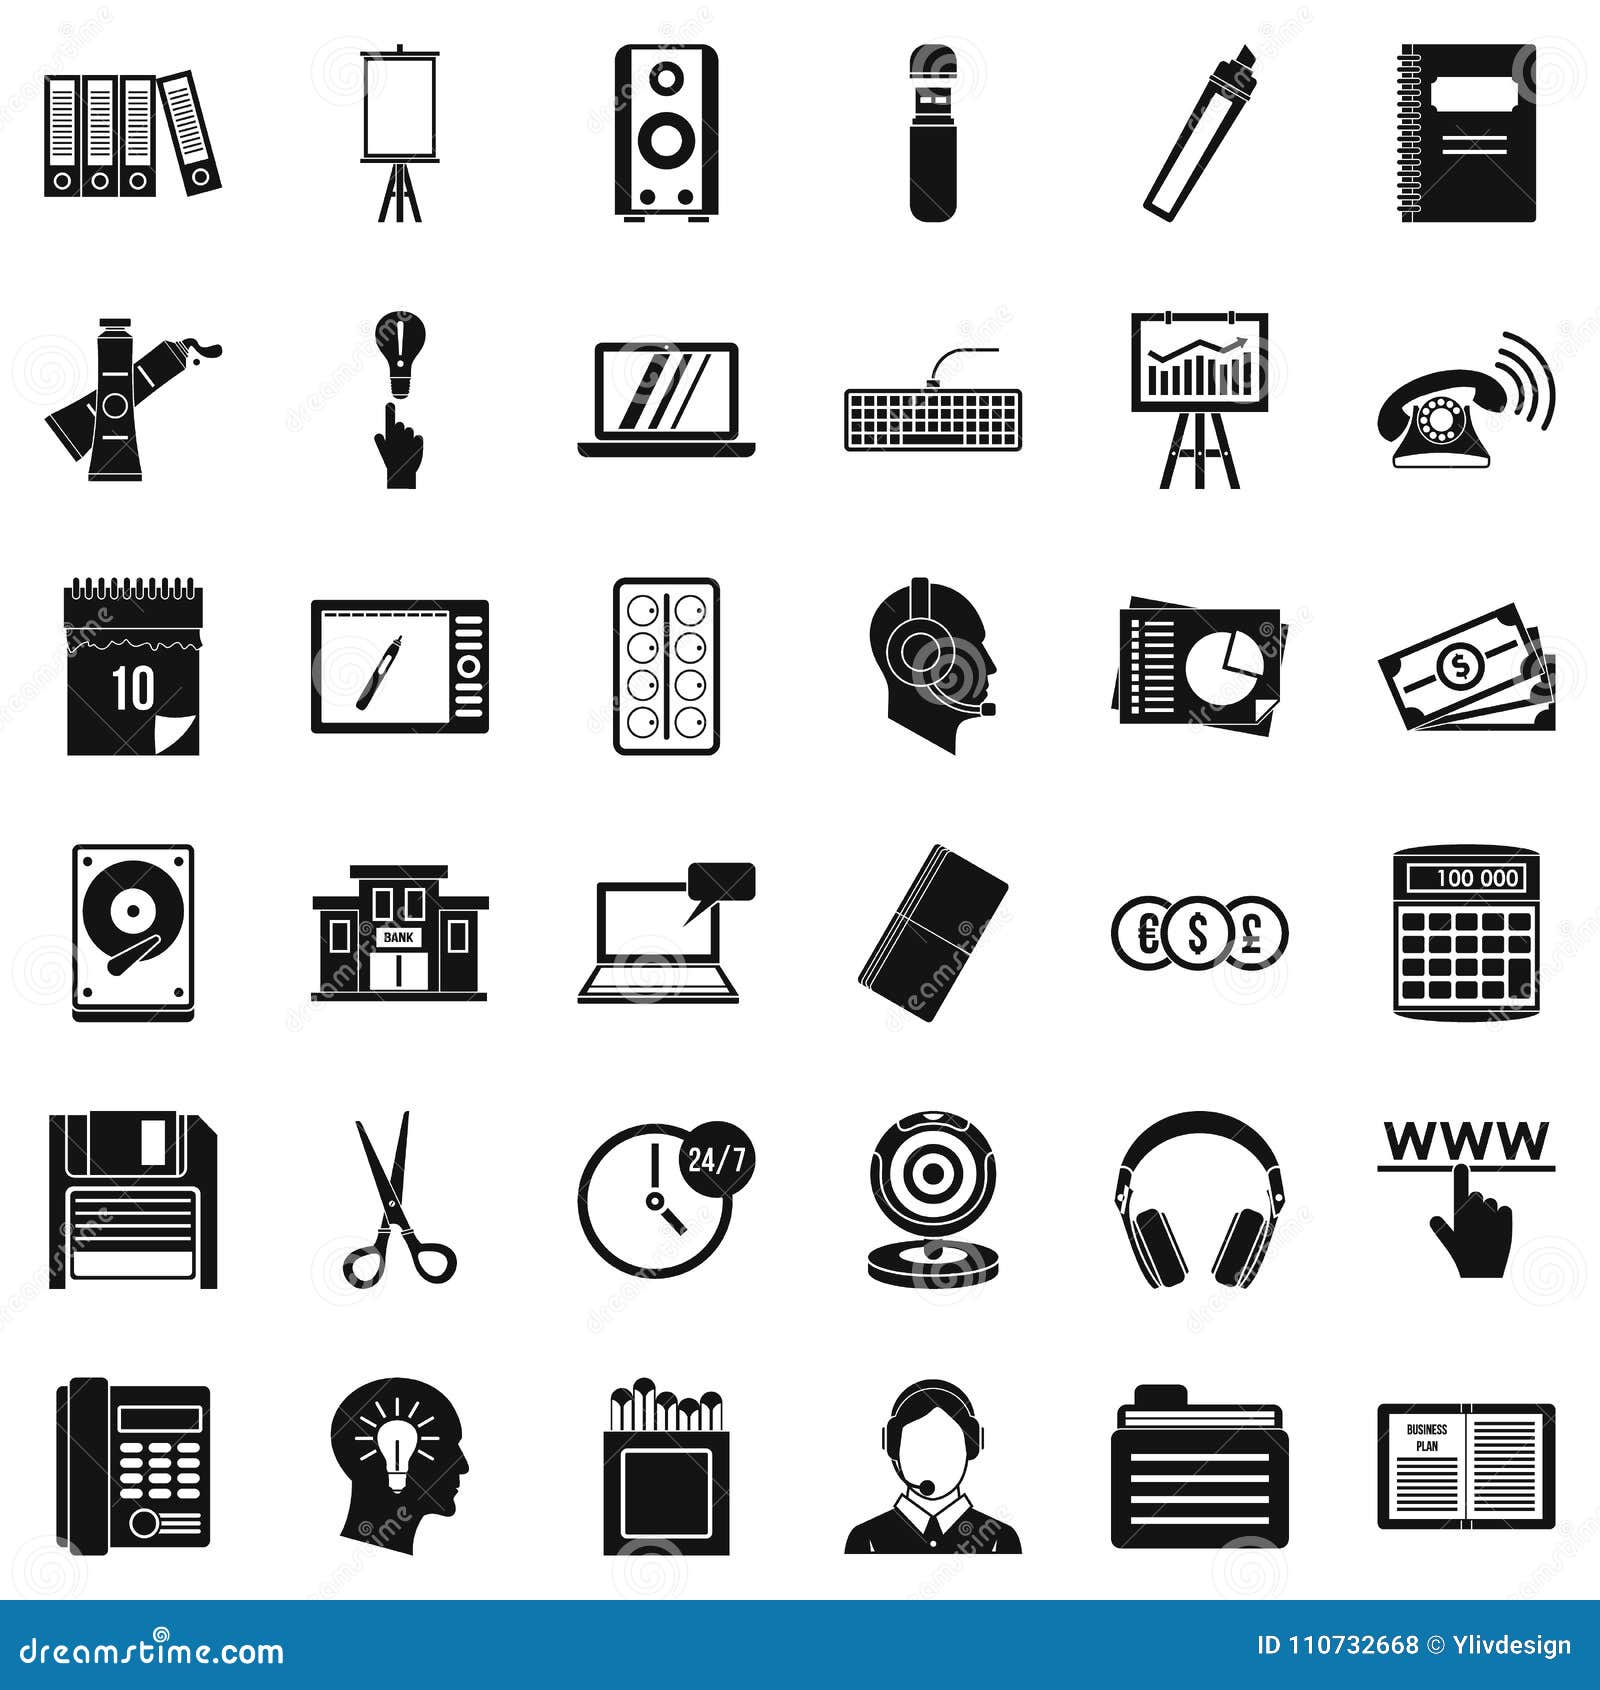 clerical work icons set, simple style